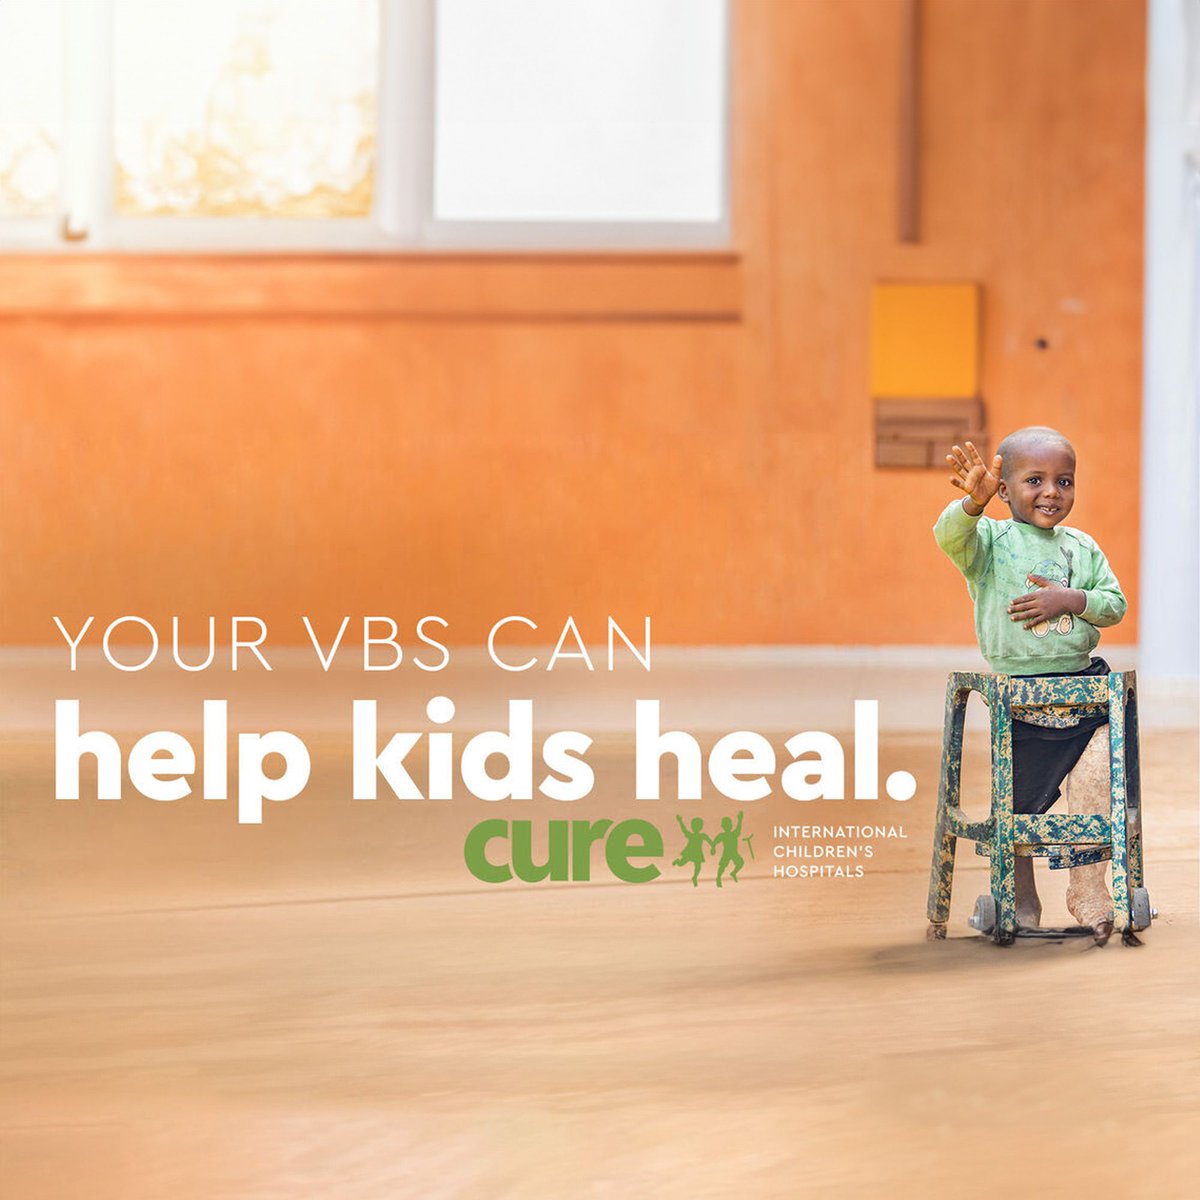 Your church’s VBS can have a HUGE impact on the lives of your kids, but what if you could go even further? W/ CURE, your VBS can change the lives of children around the world! Your support will also make sure that patients hear the good news of Jesus! cureinternational.swoogo.com/vbs24/5251694